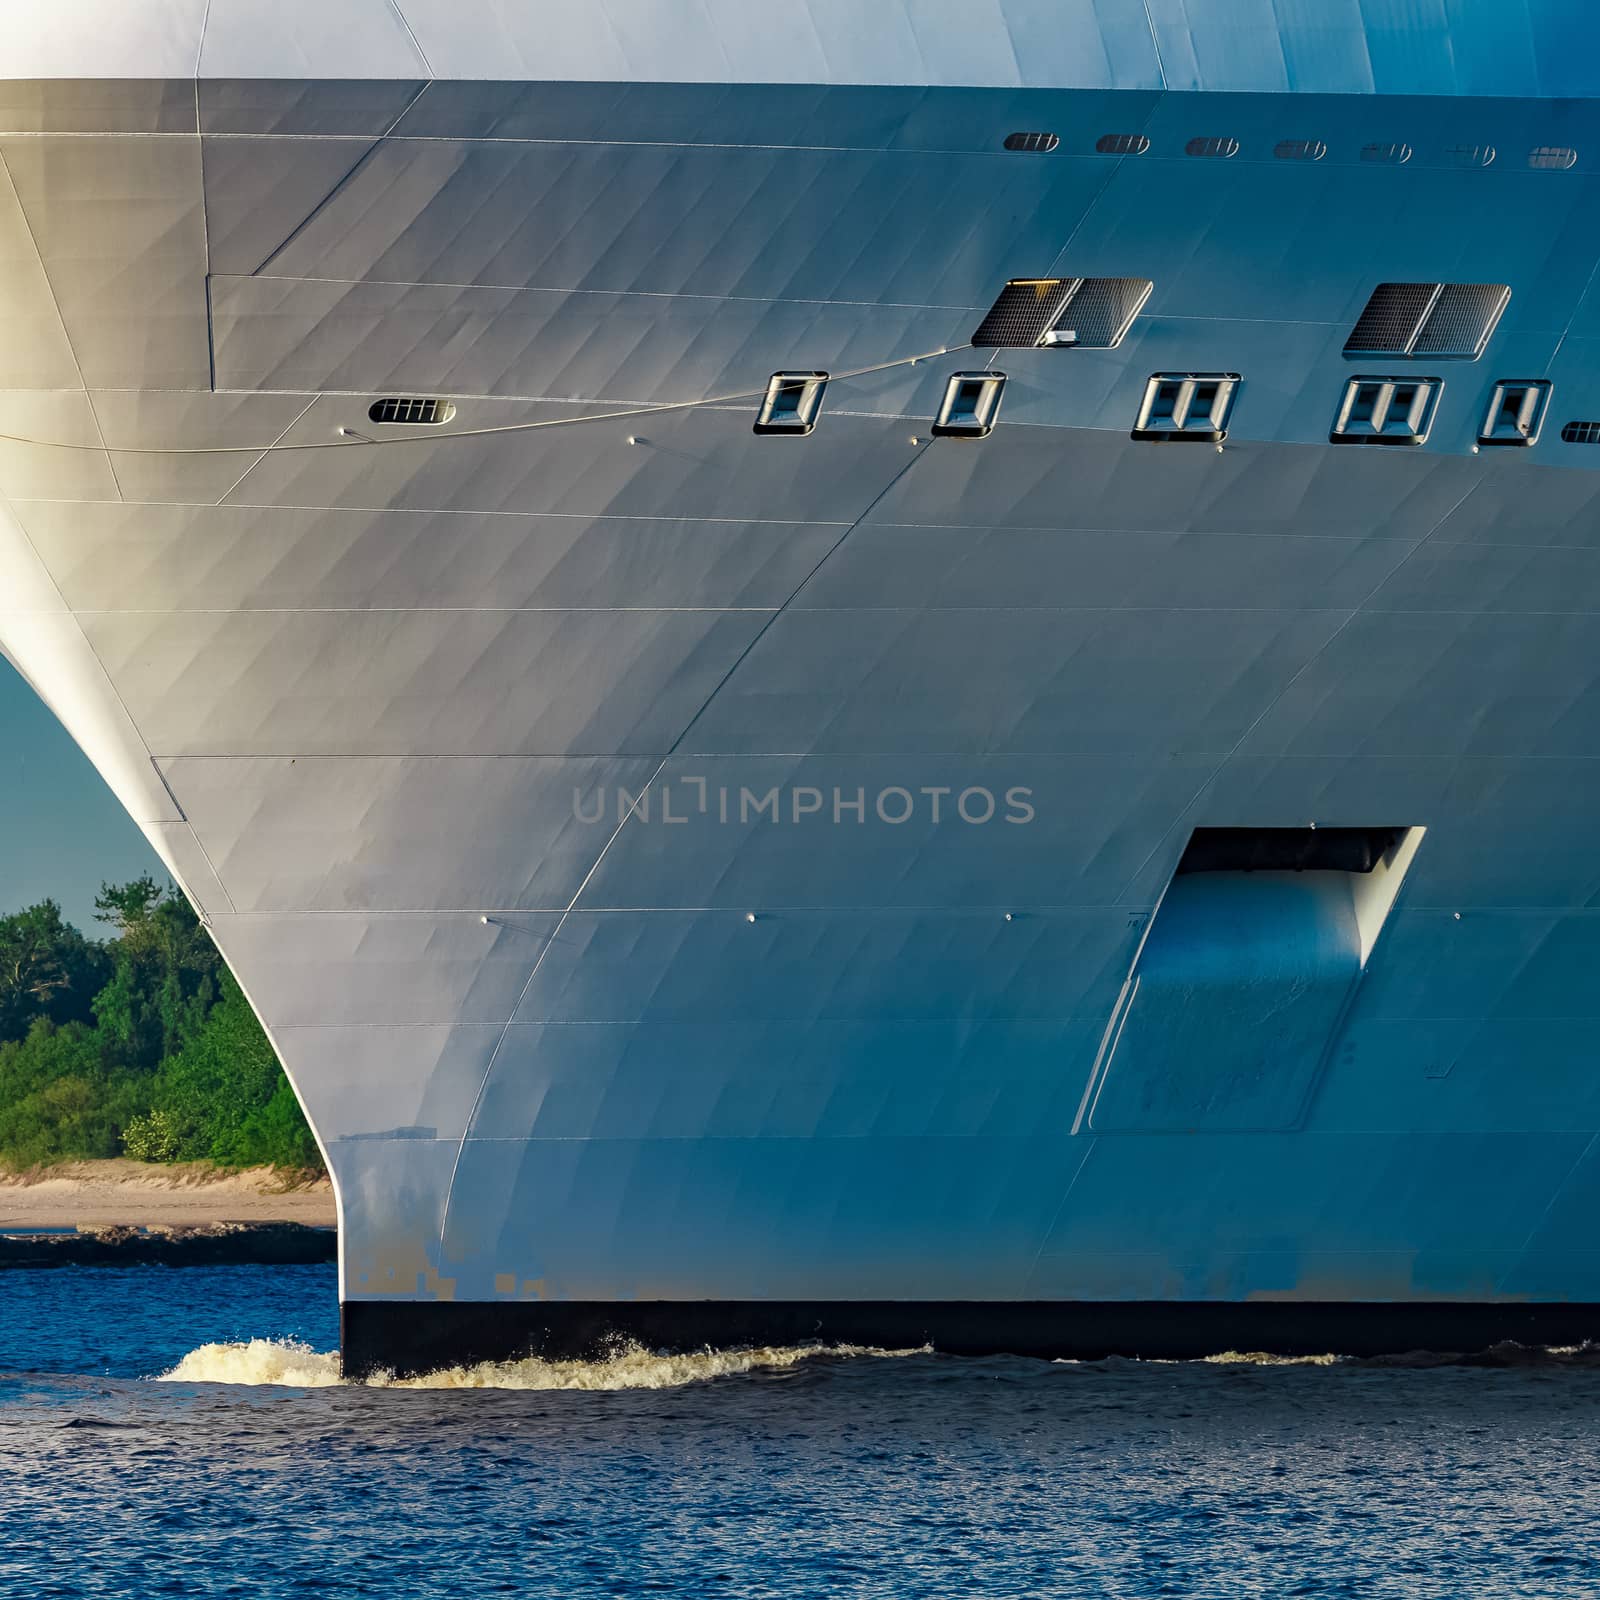 White giant brand new passenger ship moving in clear summer day